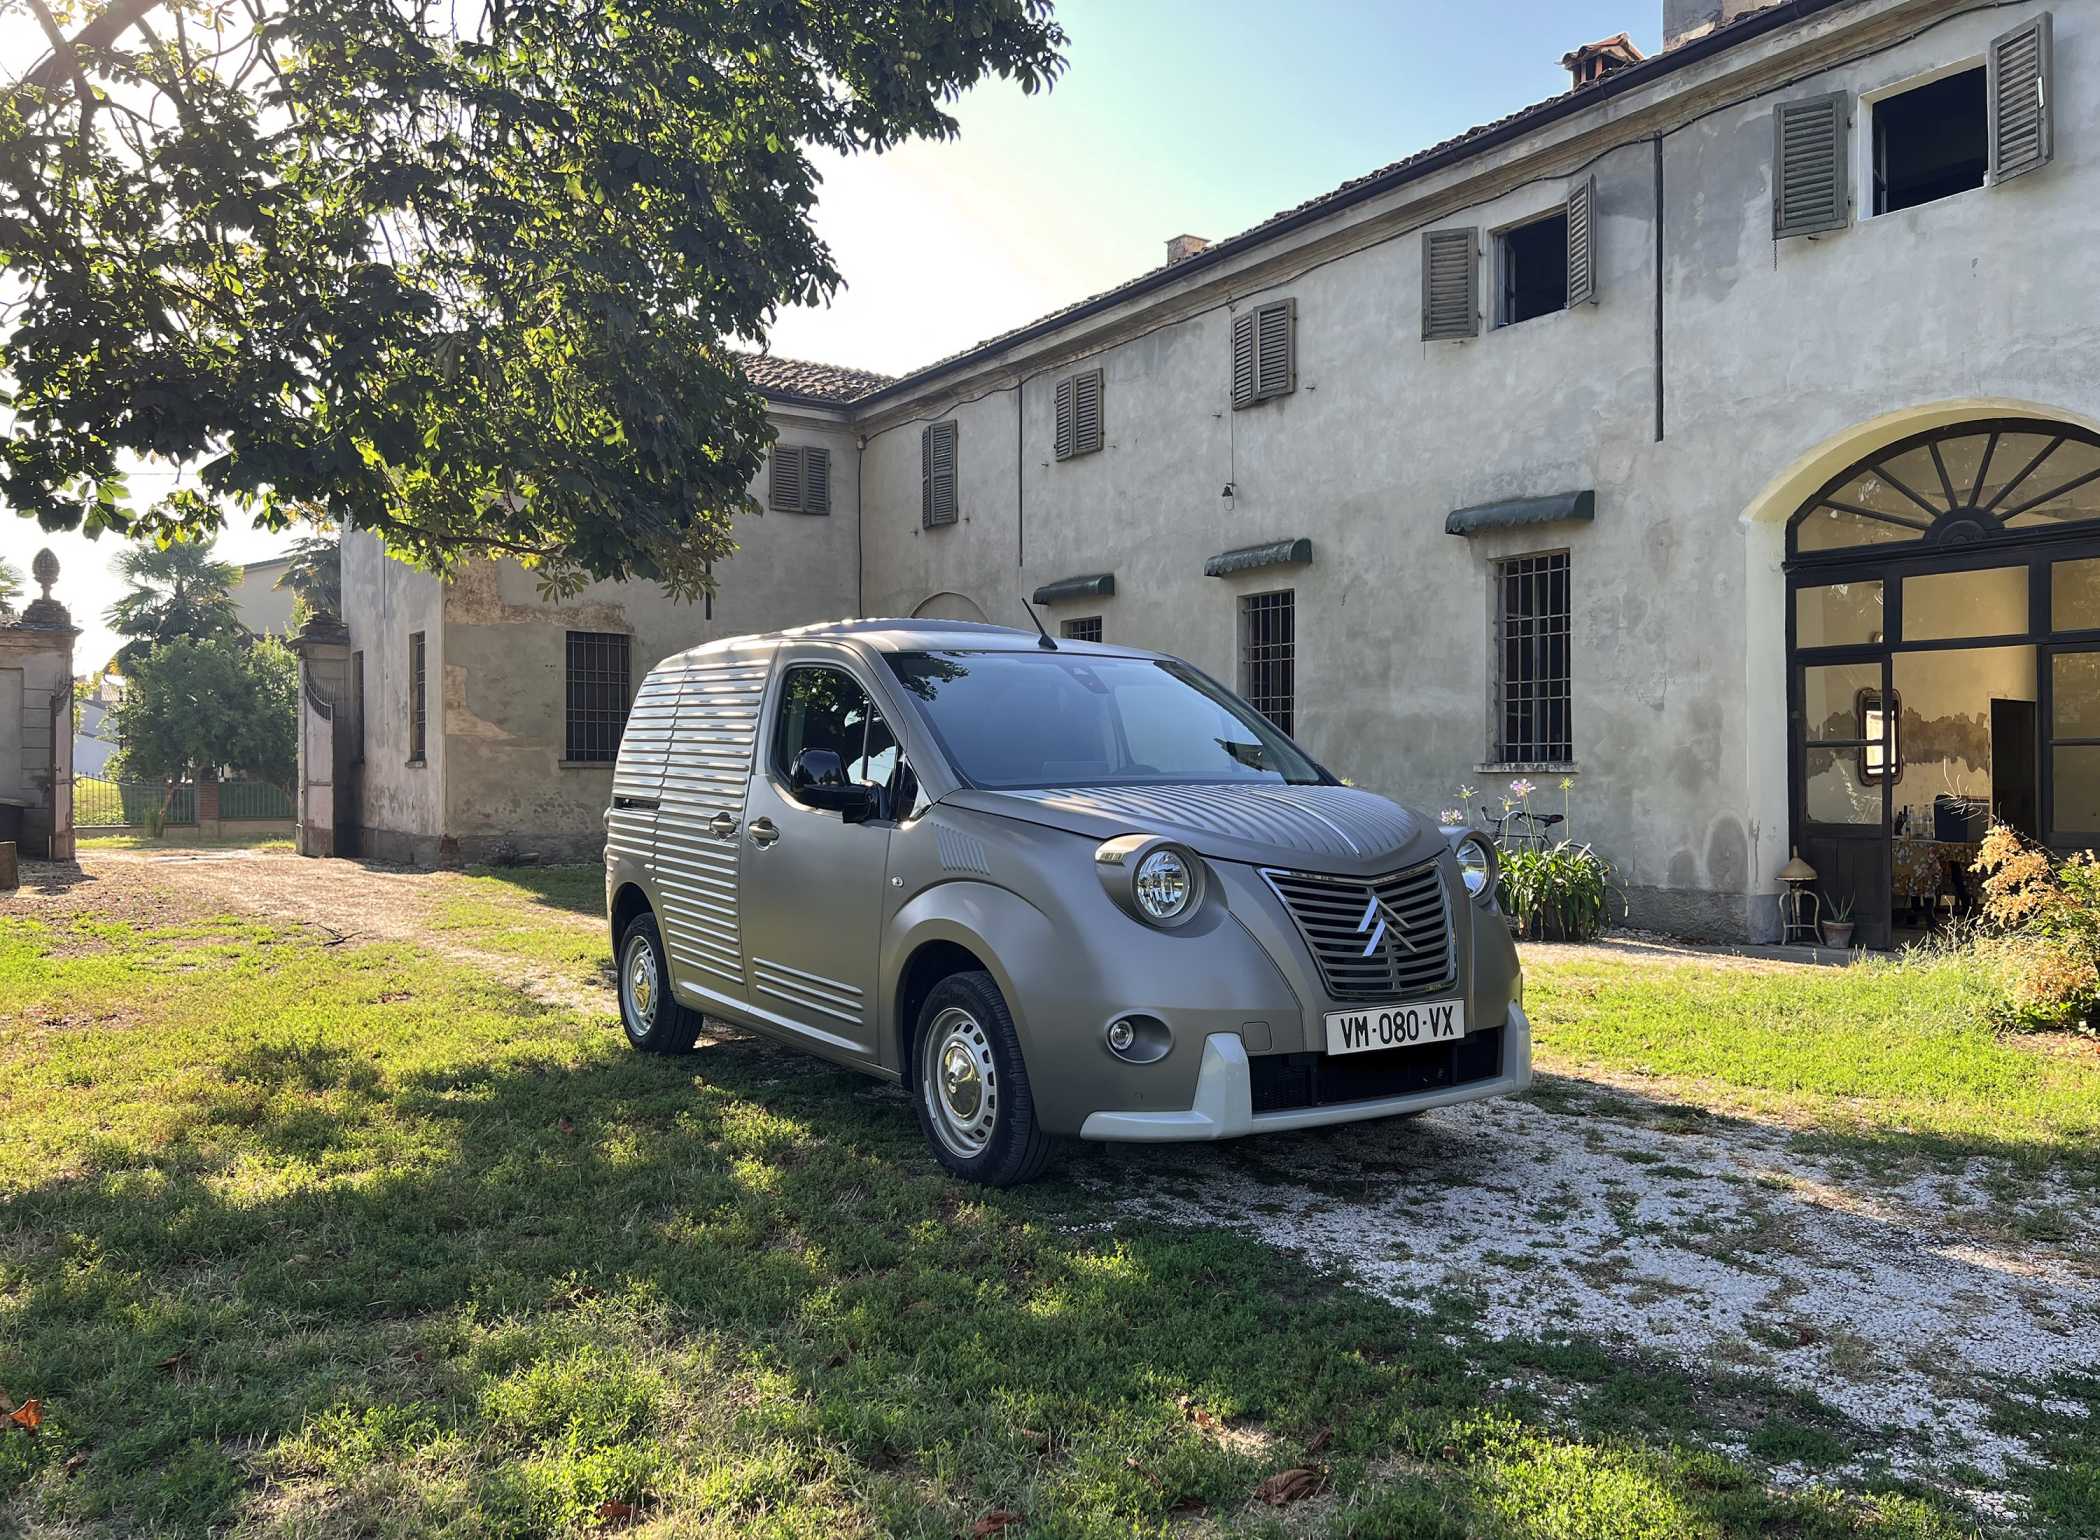 A Fourgonnette Panel Van parked beside an old house under the shade of a tree.